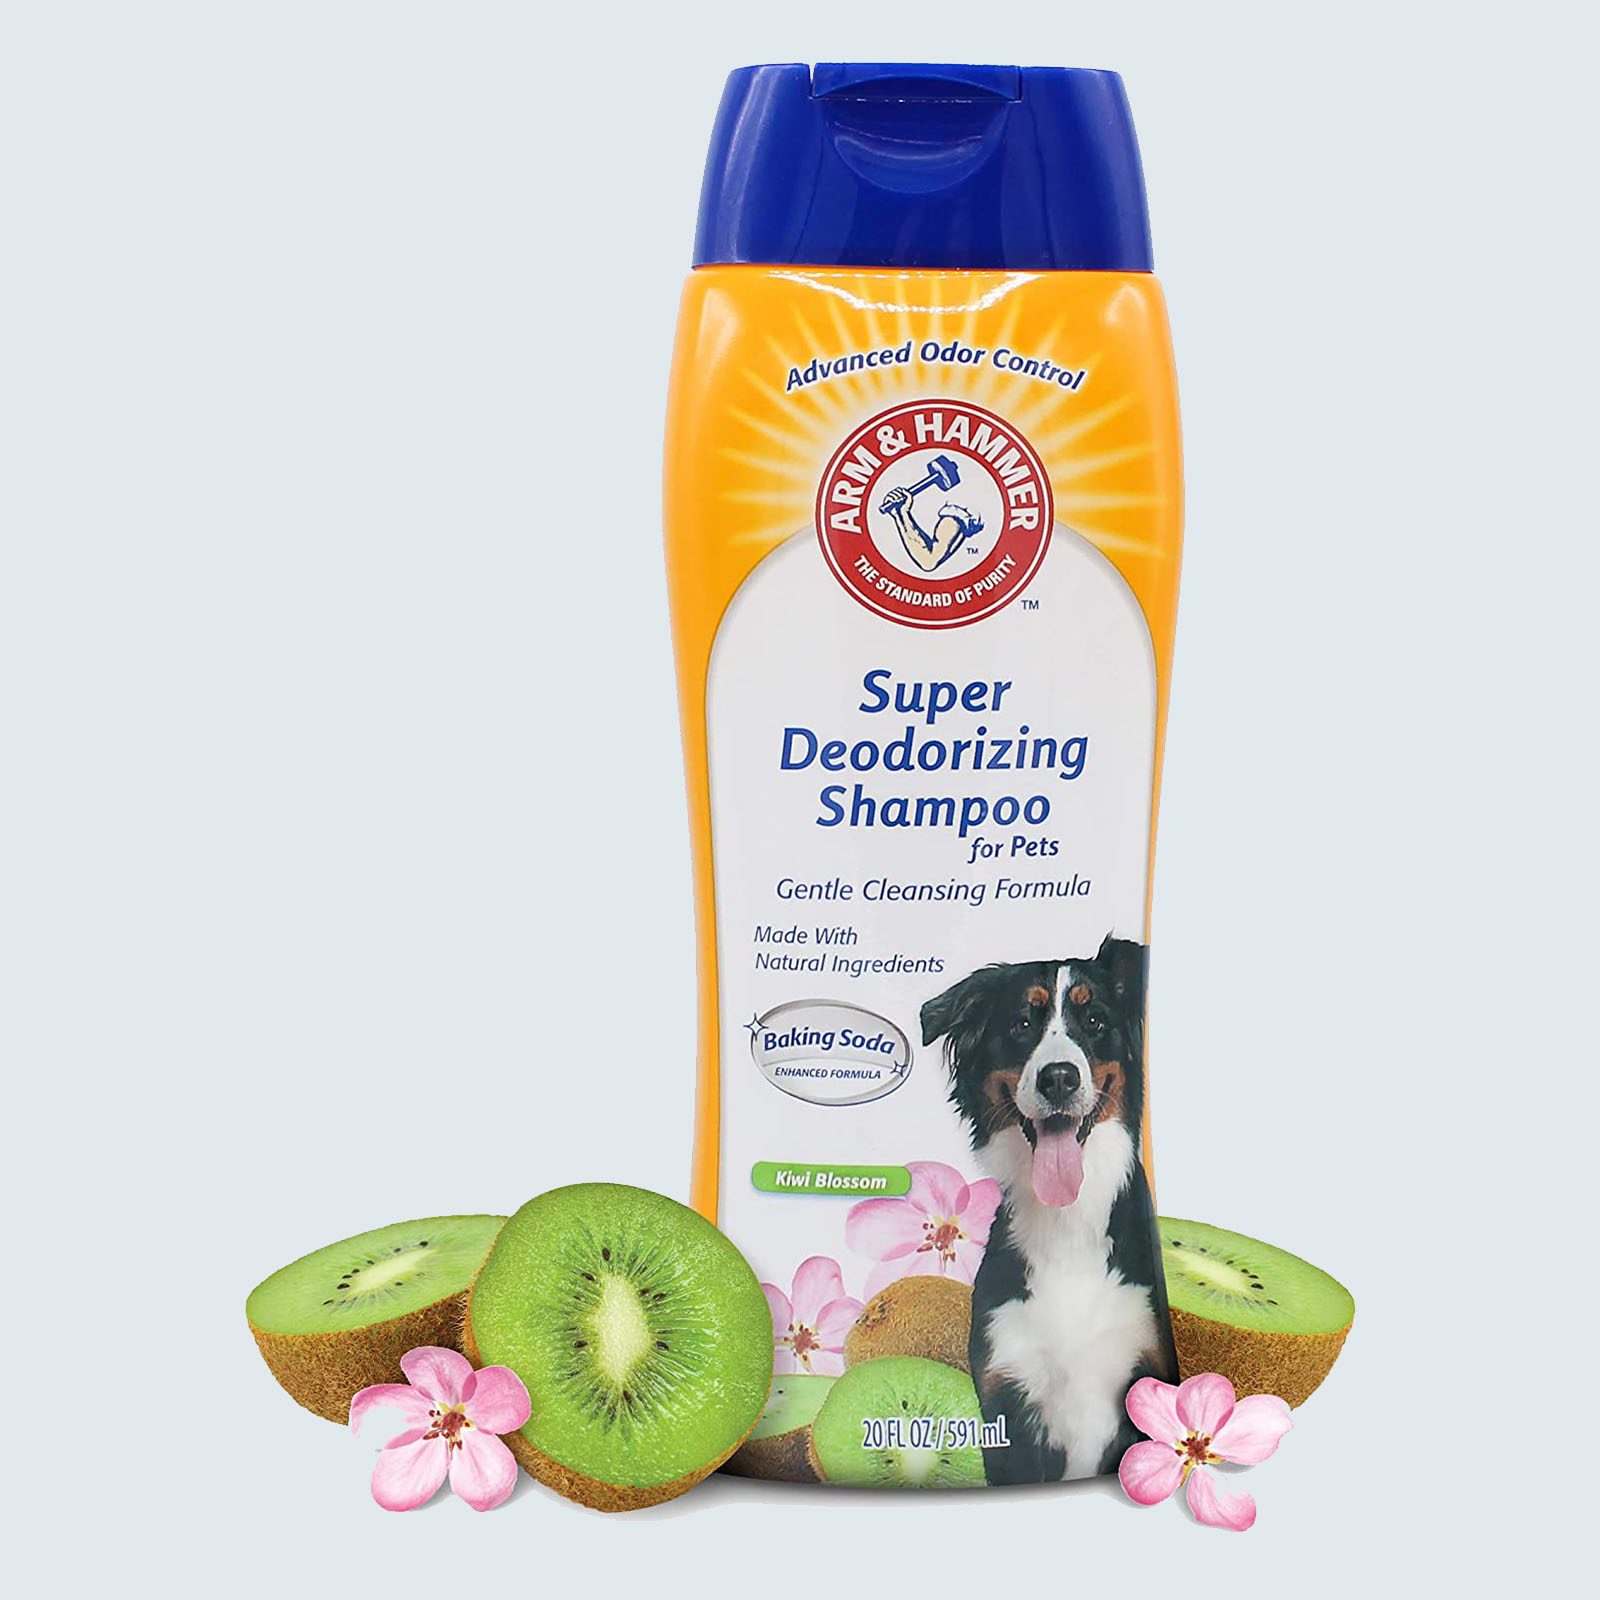 👉New DOG GROOMING SHAMPOO FROTHING, CLEAN your DOG and SAVE MONEY 